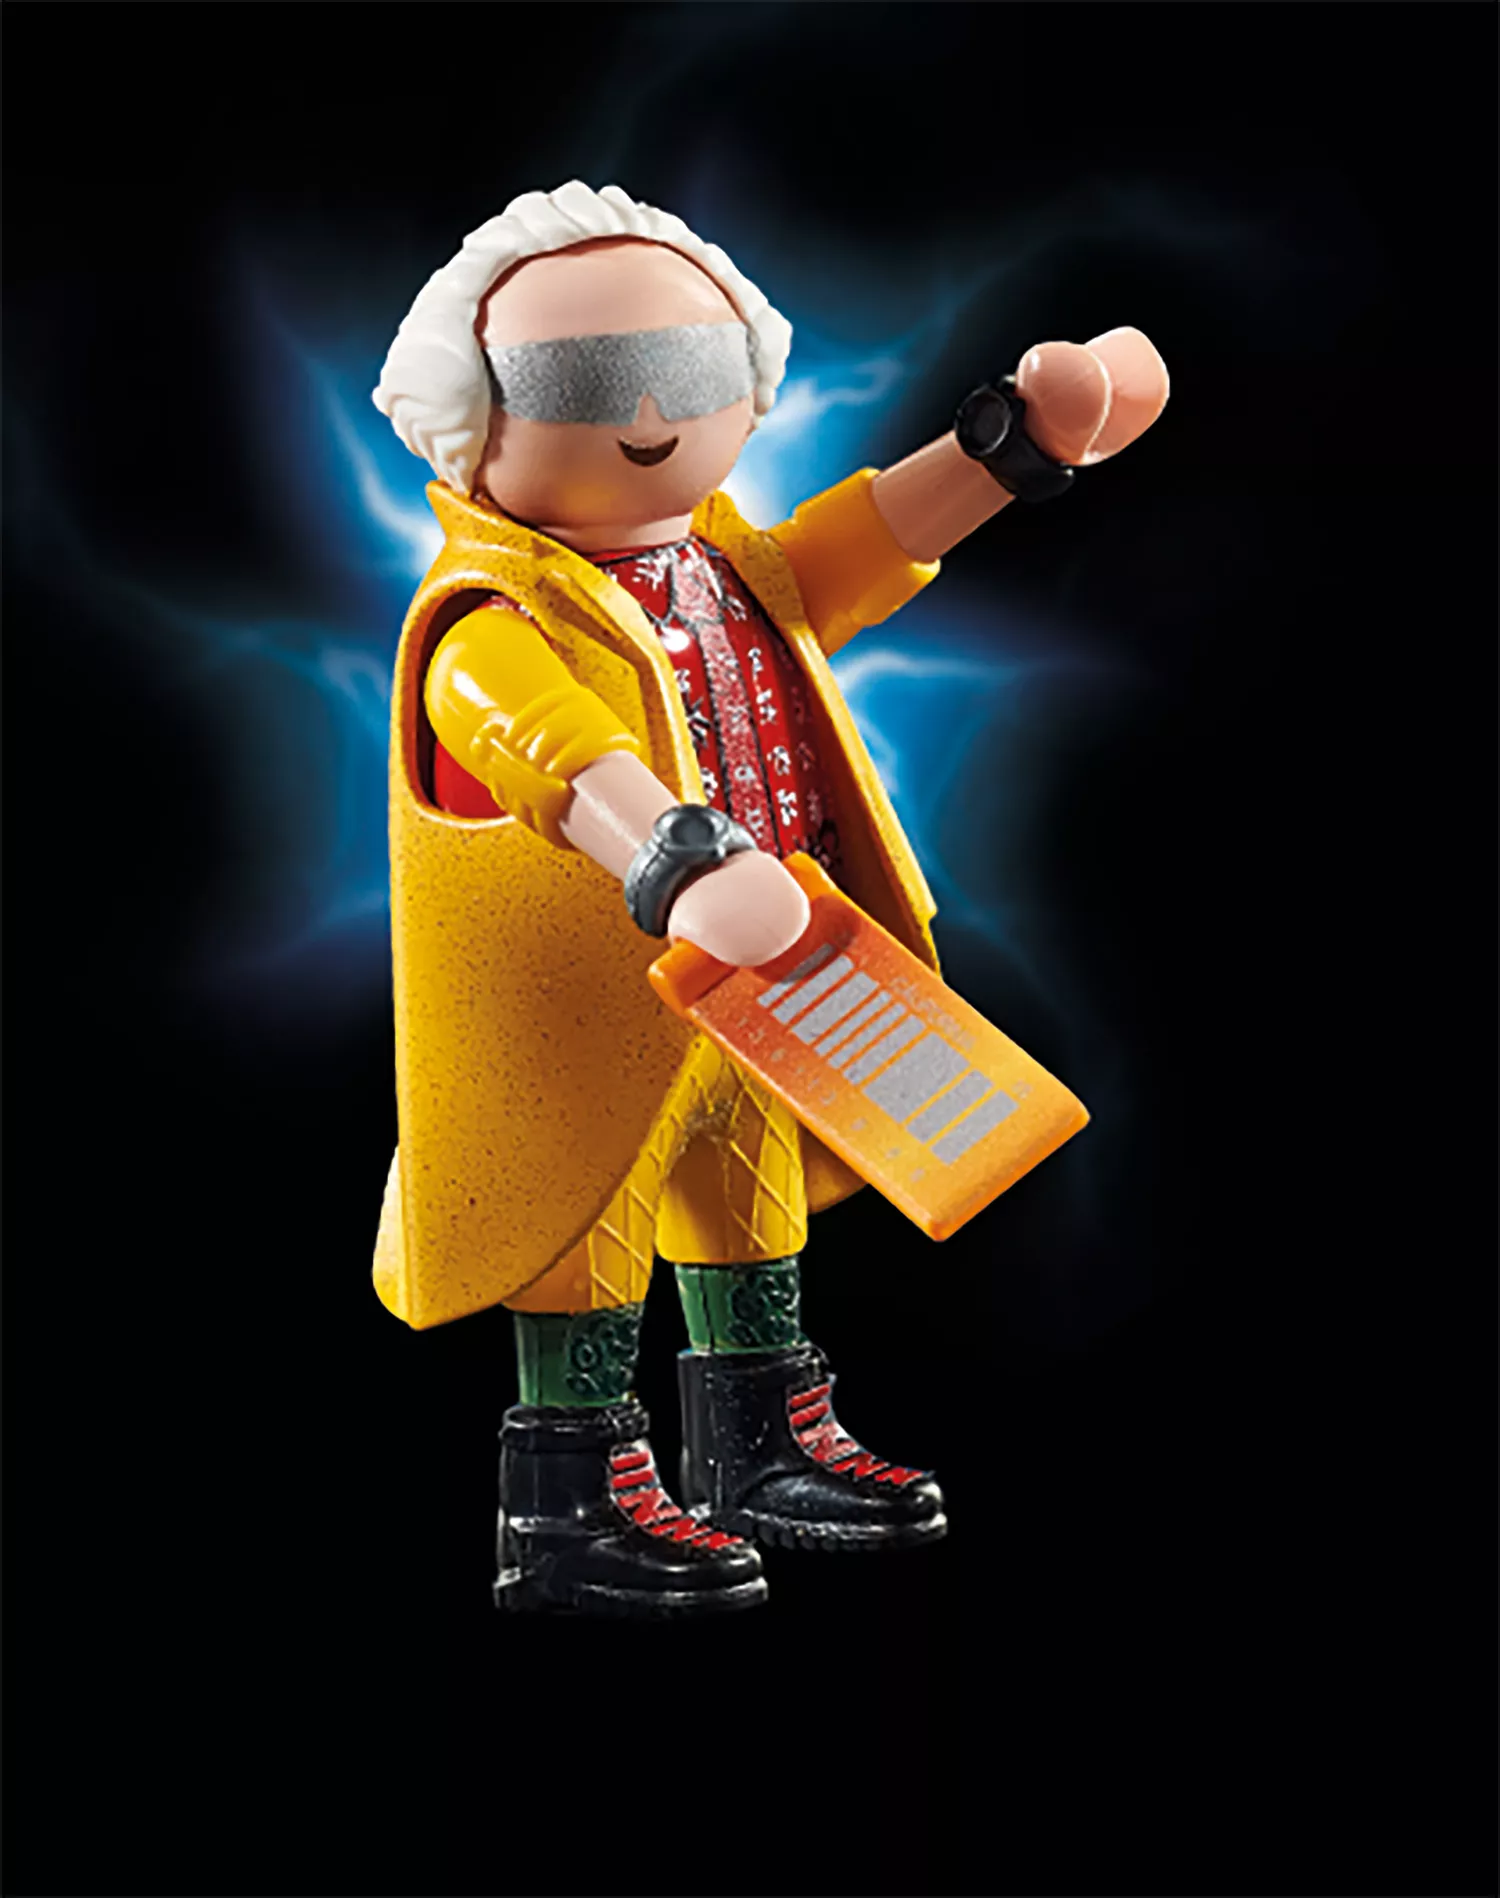 PLAYMOBIL 70634 Back to the Future Part II Verfolgung mit Hoverboard